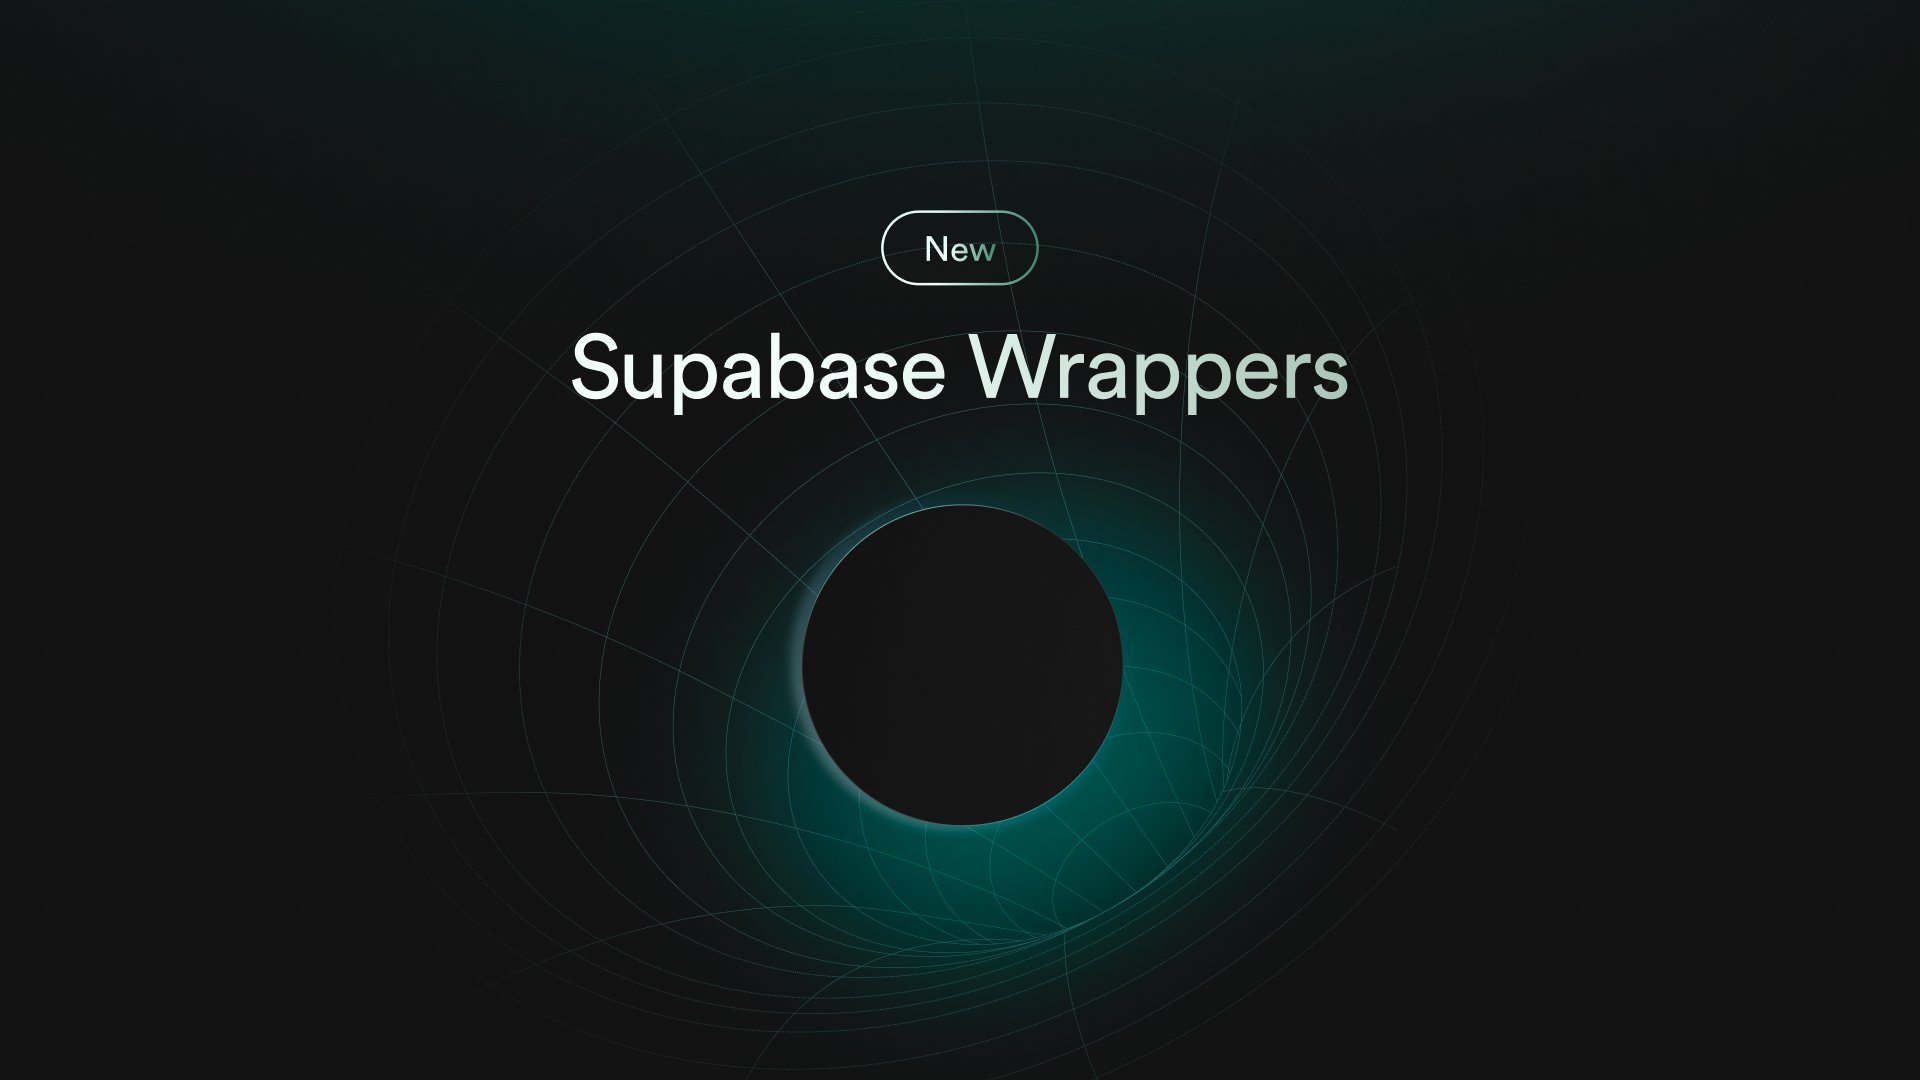 Supabase Wrappers, a Postgres FDW framework written in Rust thumbnail